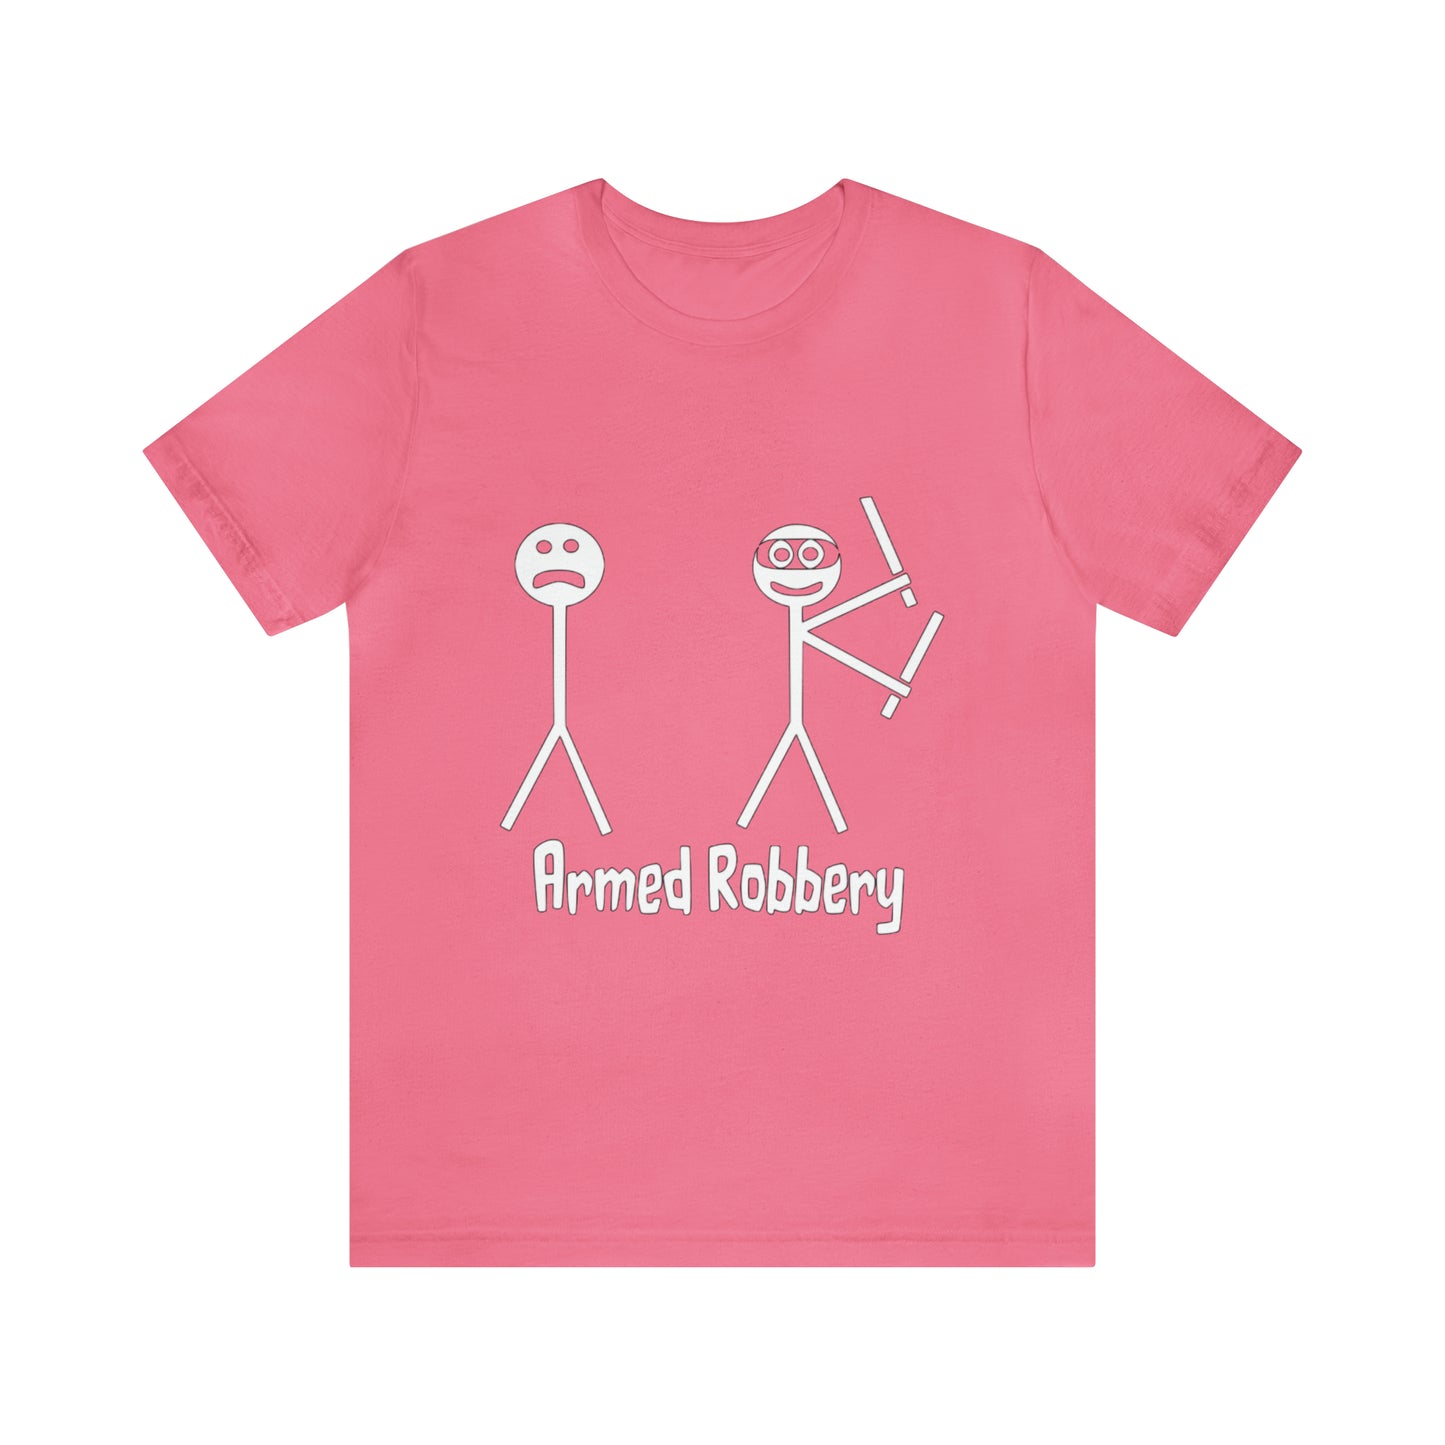 Armed Robbery - Unisex T-Shirt